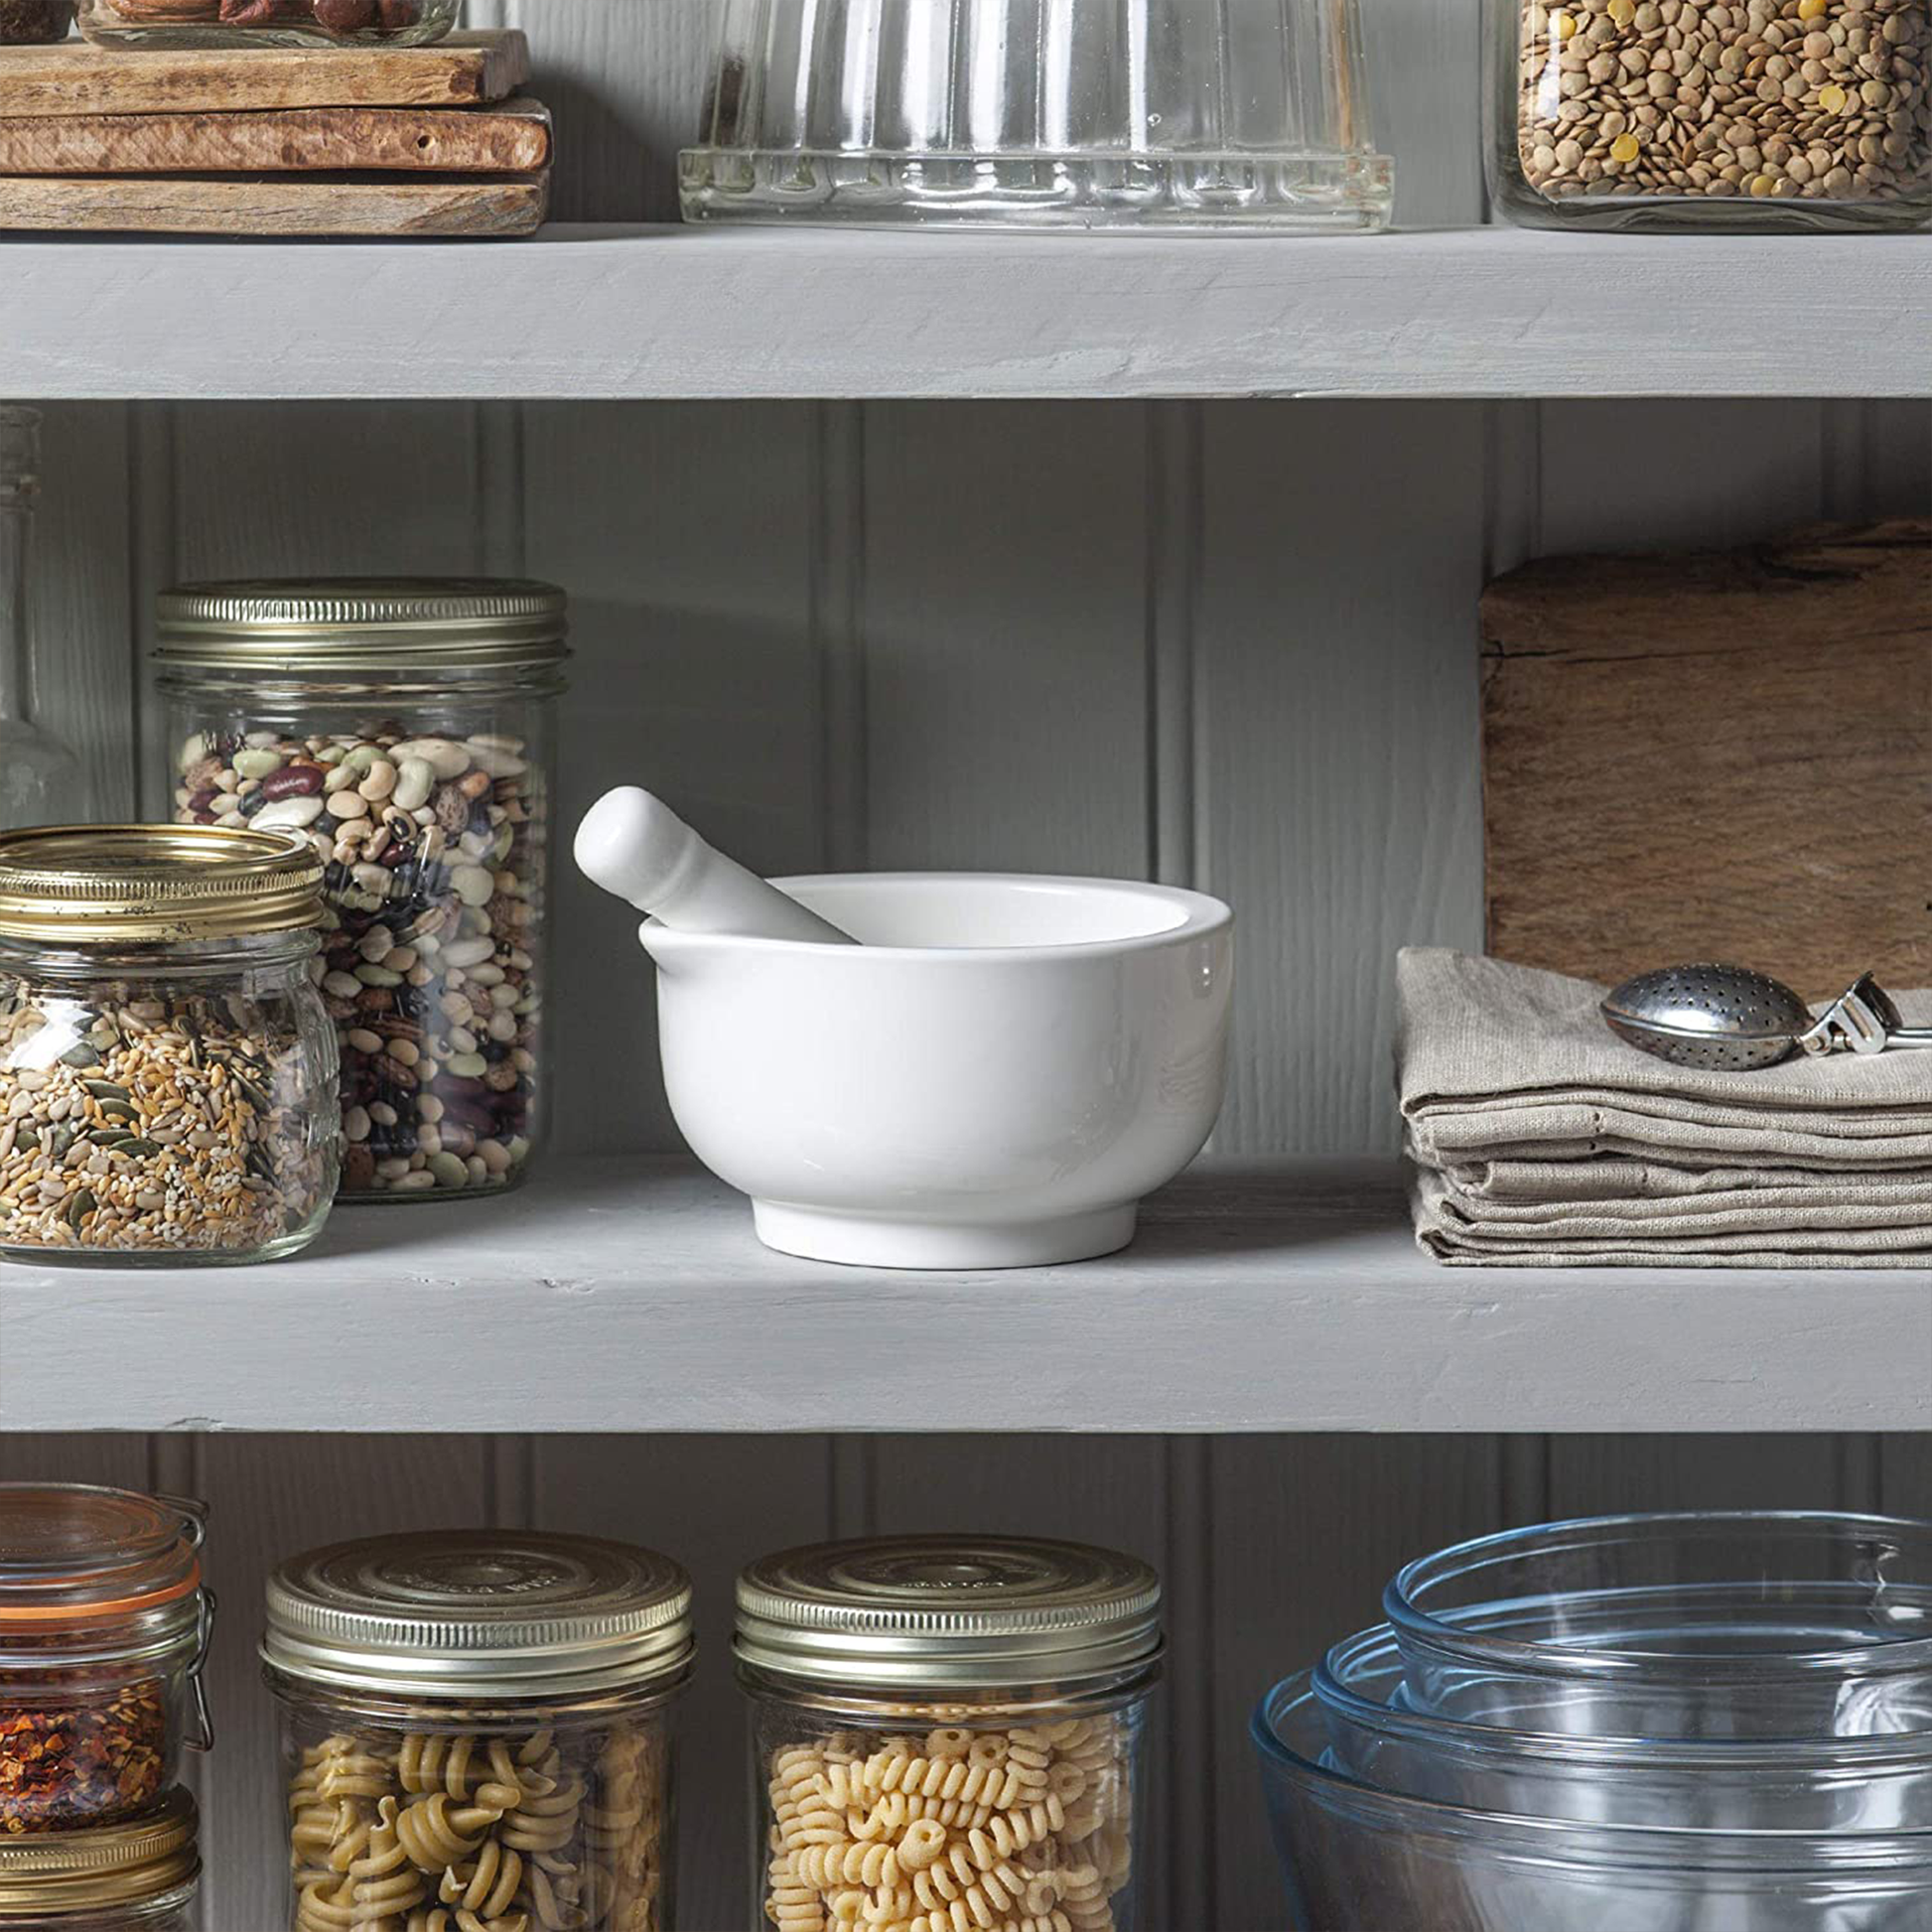 the moratar and pestle on a pantry shelf